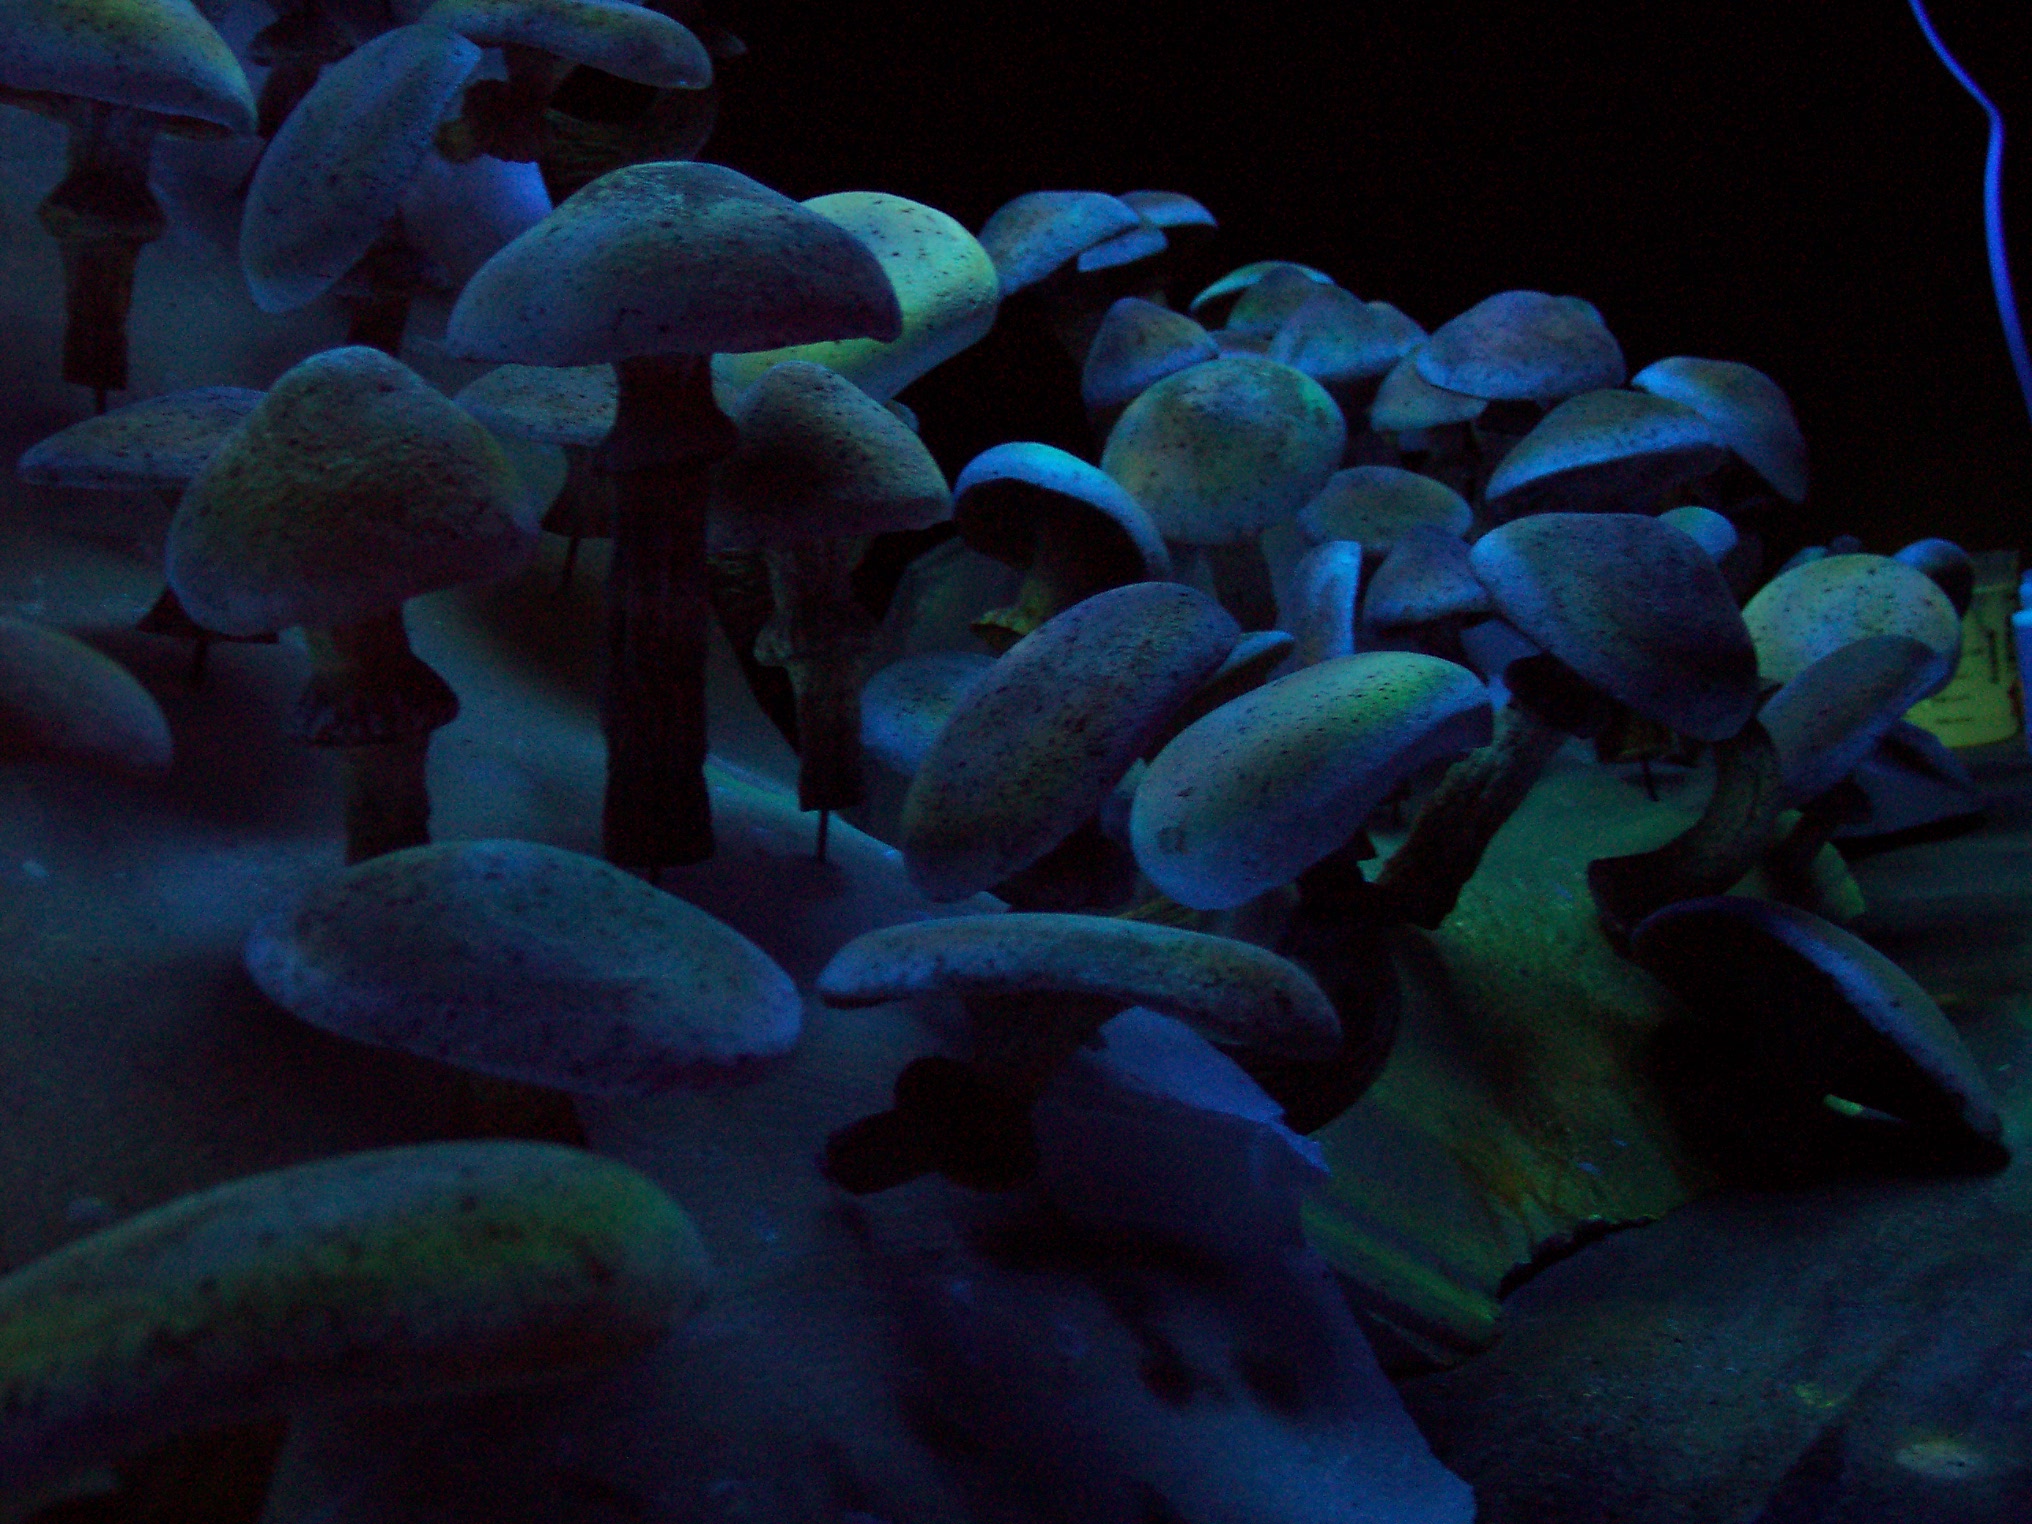 airbrushed blacklight mushrooms for 